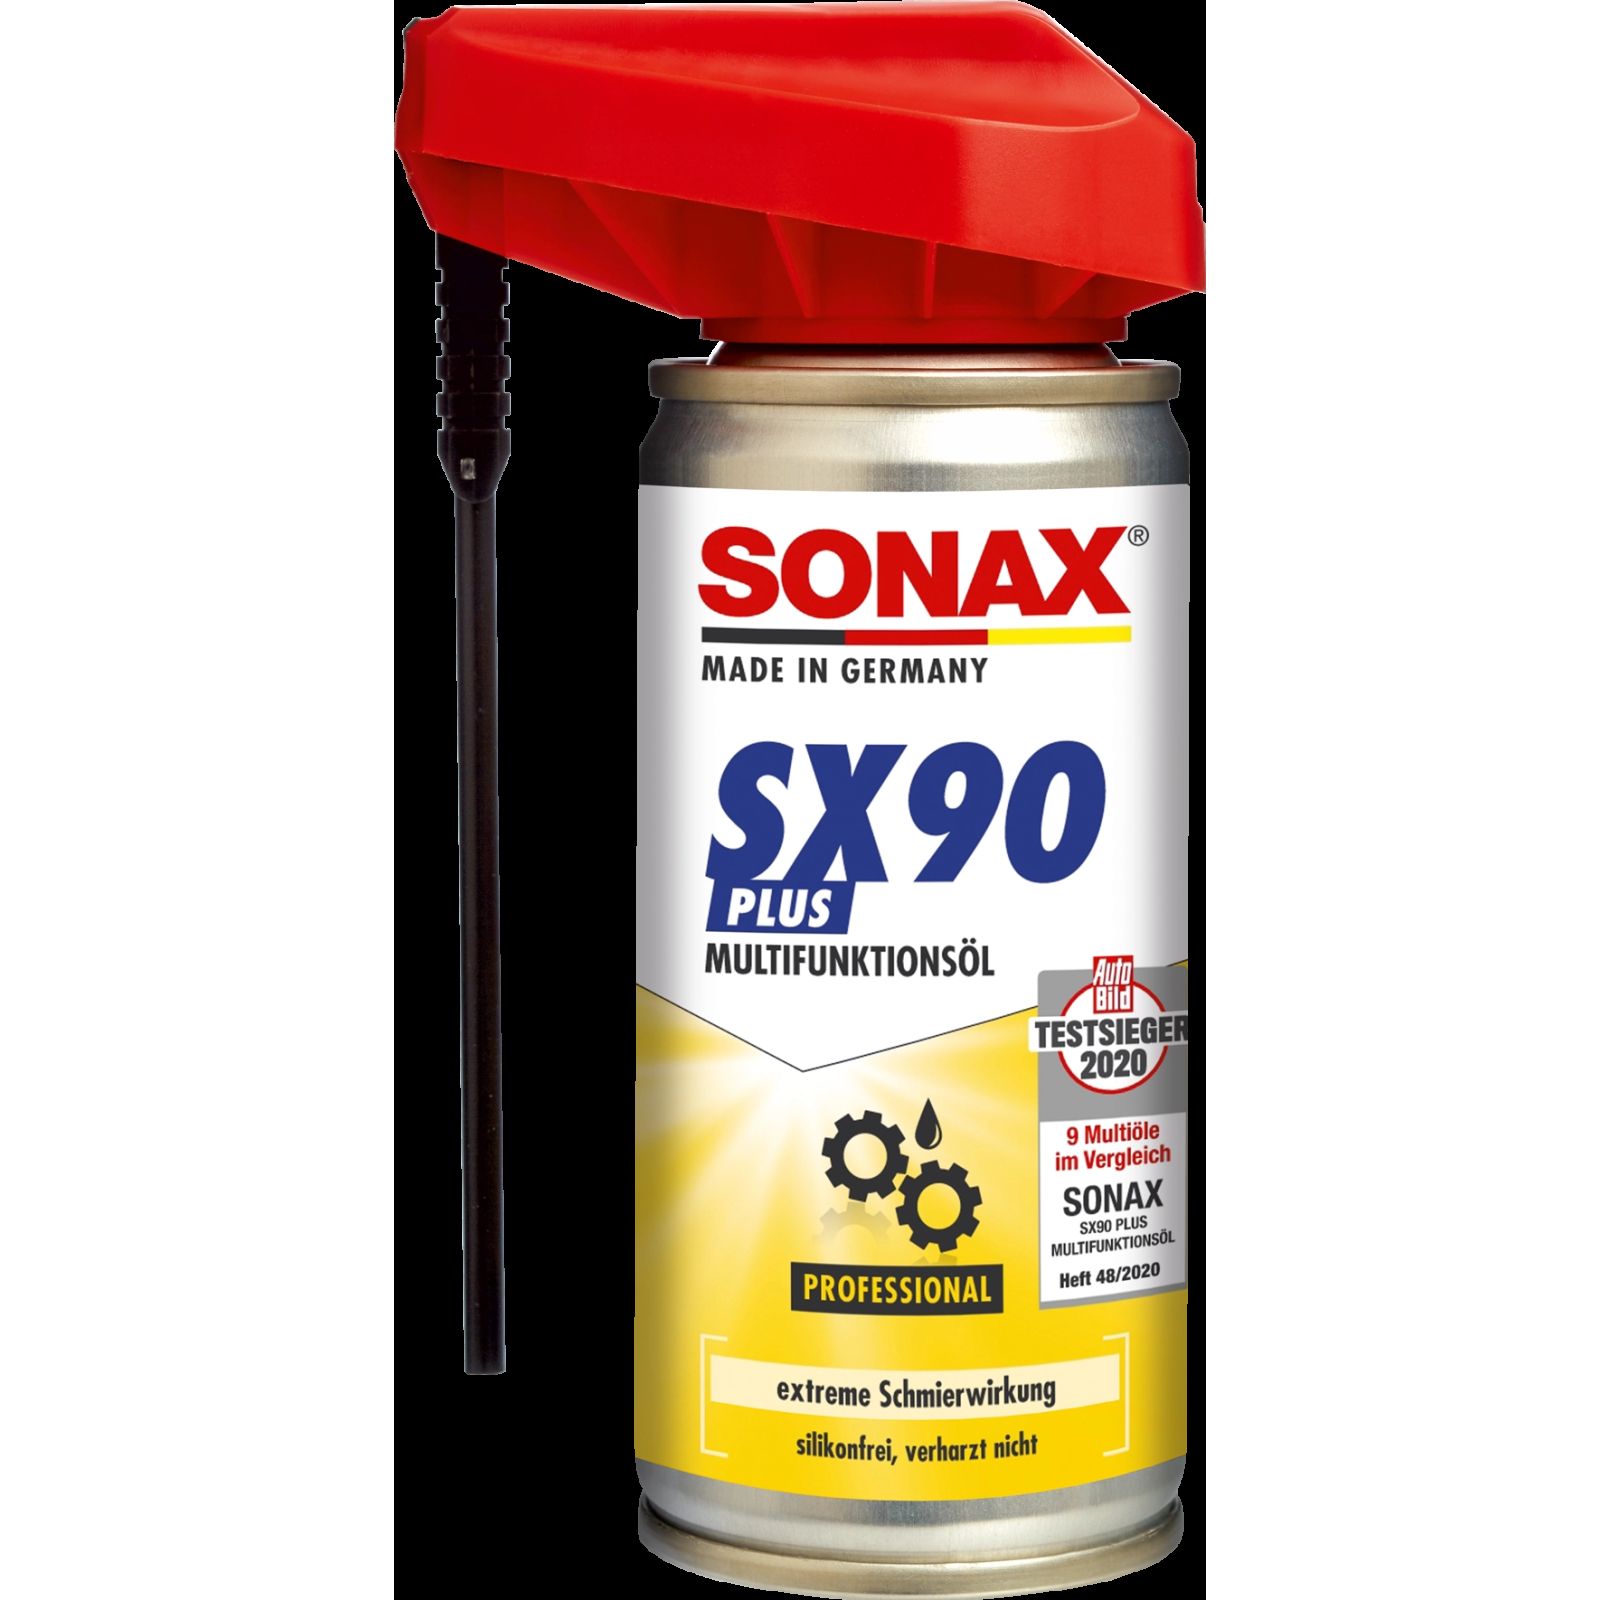 https://www.autoteile-store.at/img/product/sonax-sx90-plus-m-easyspray-100ml-04741000-4420/aad9421b35fcab6b68b23b97db5a5c24_1600.jpg